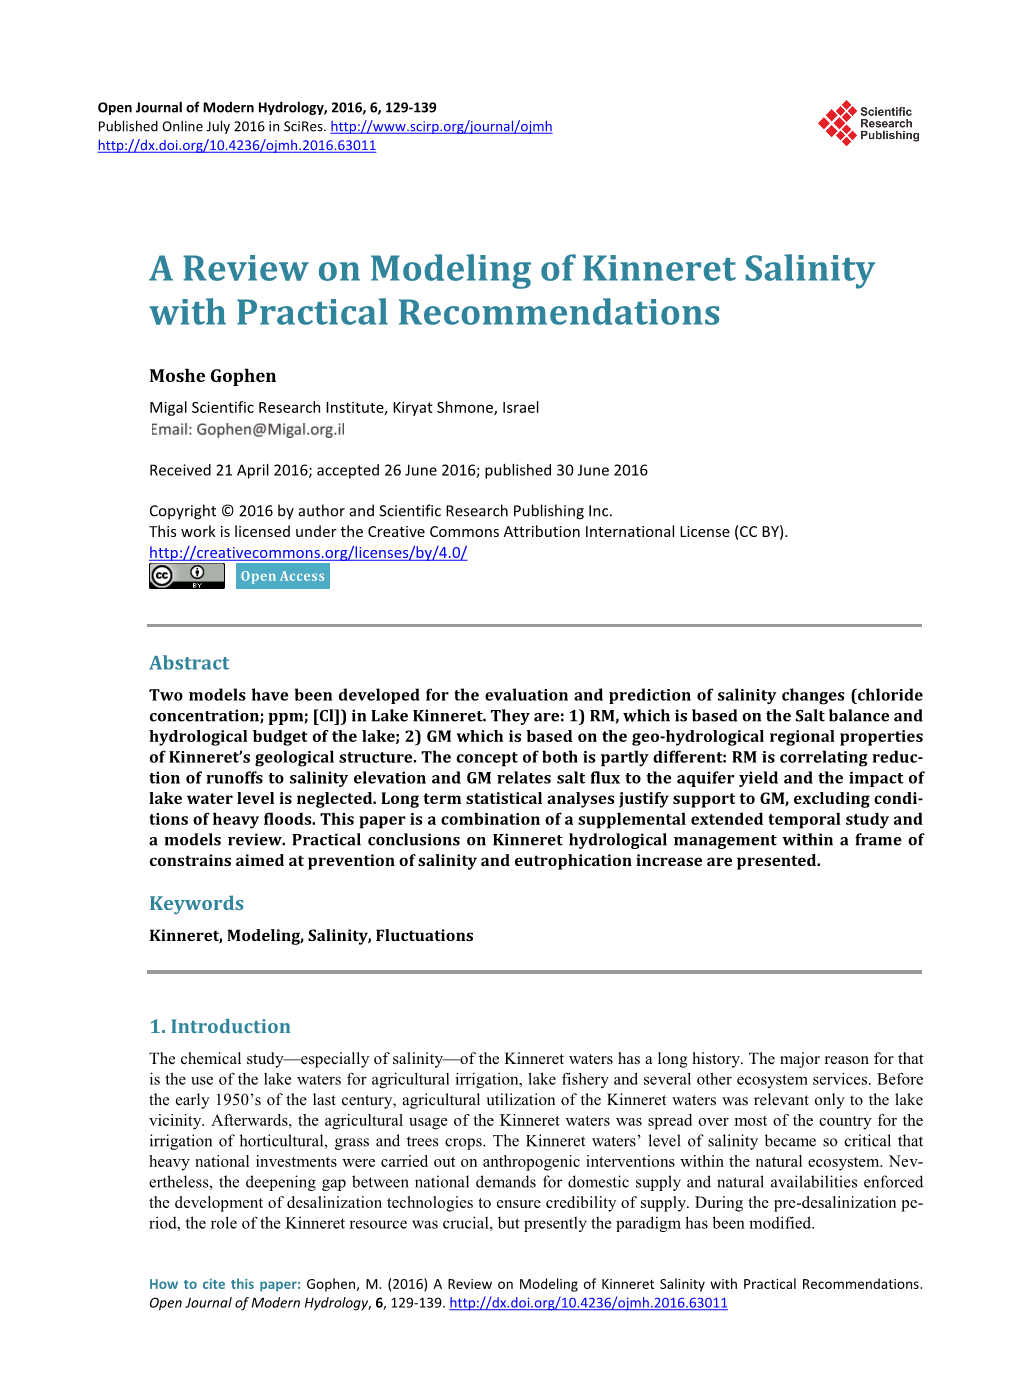 A Review on Modeling of Kinneret Salinity with Practical Recommendations